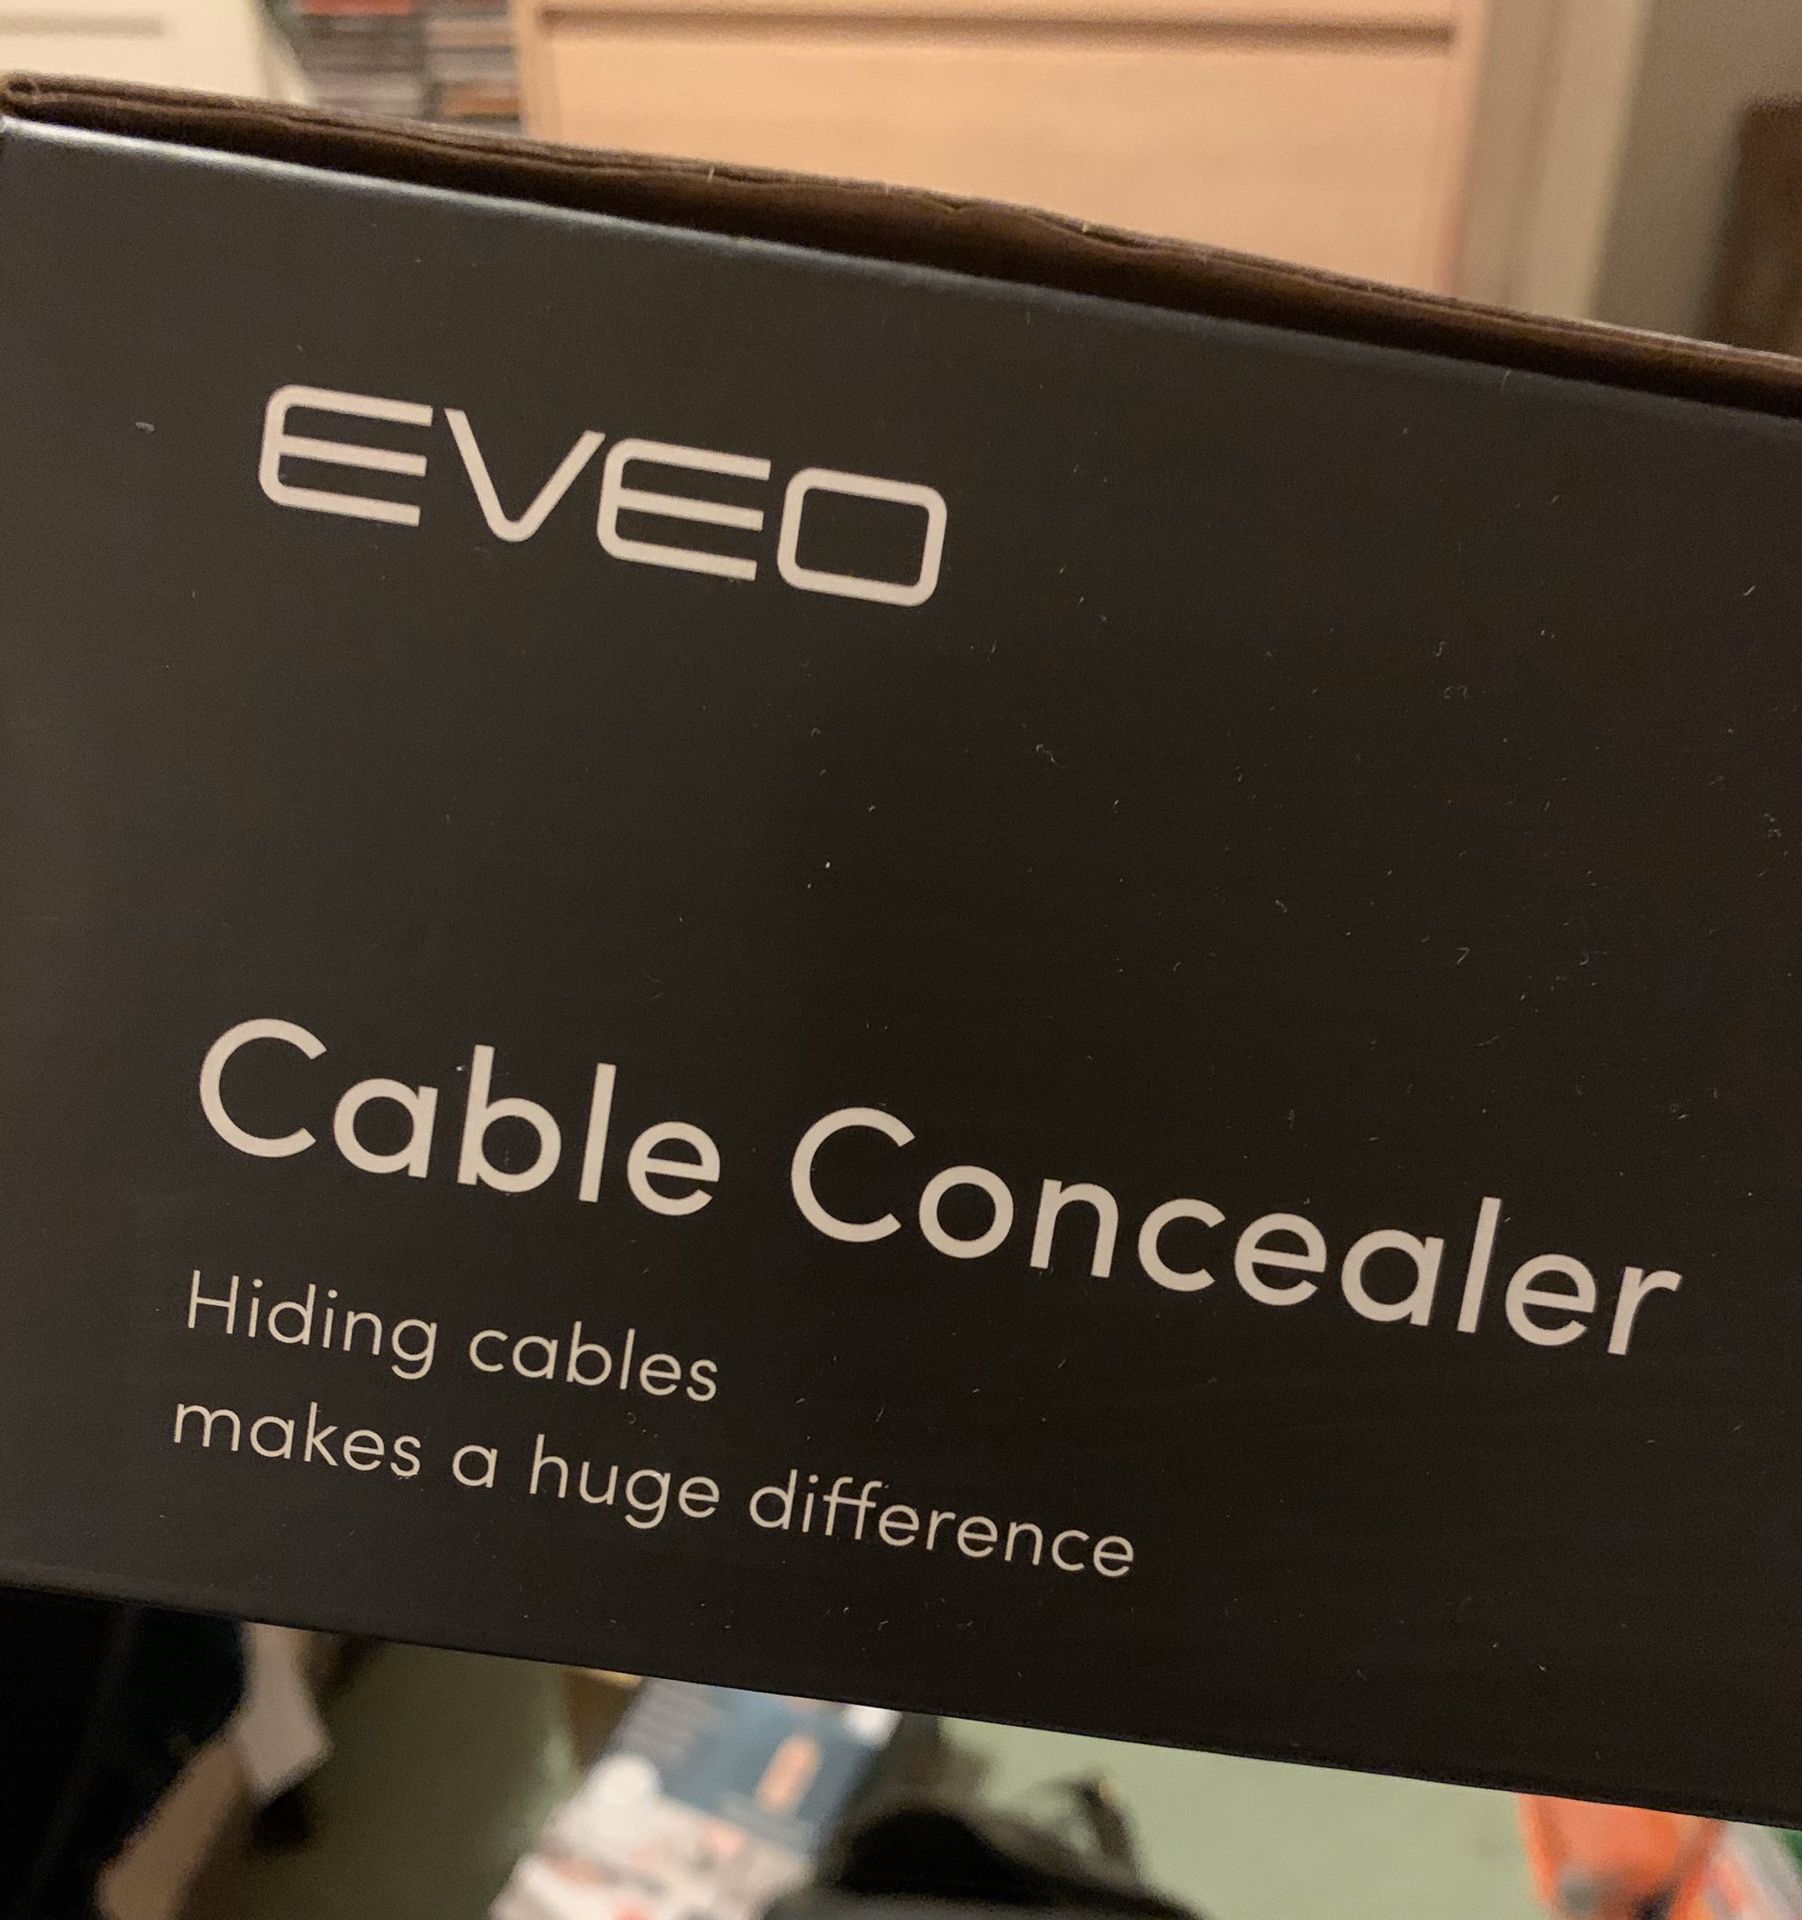 Eveo Cable Concealer for Sale in Woodruff, SC - OfferUp